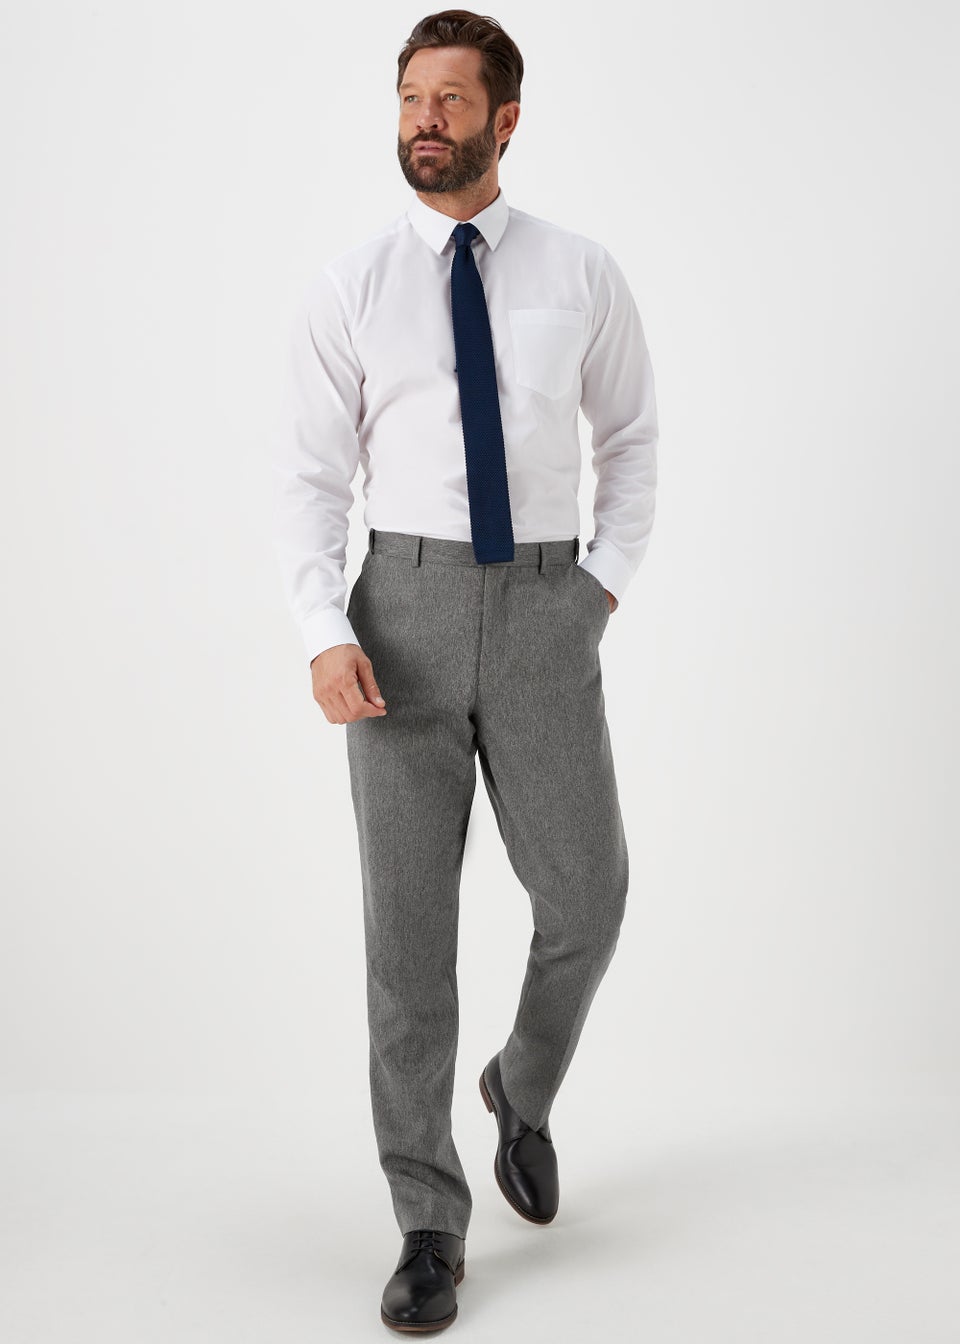 Taylor & Wright Charcoal Textured Flexi Waist Trousers